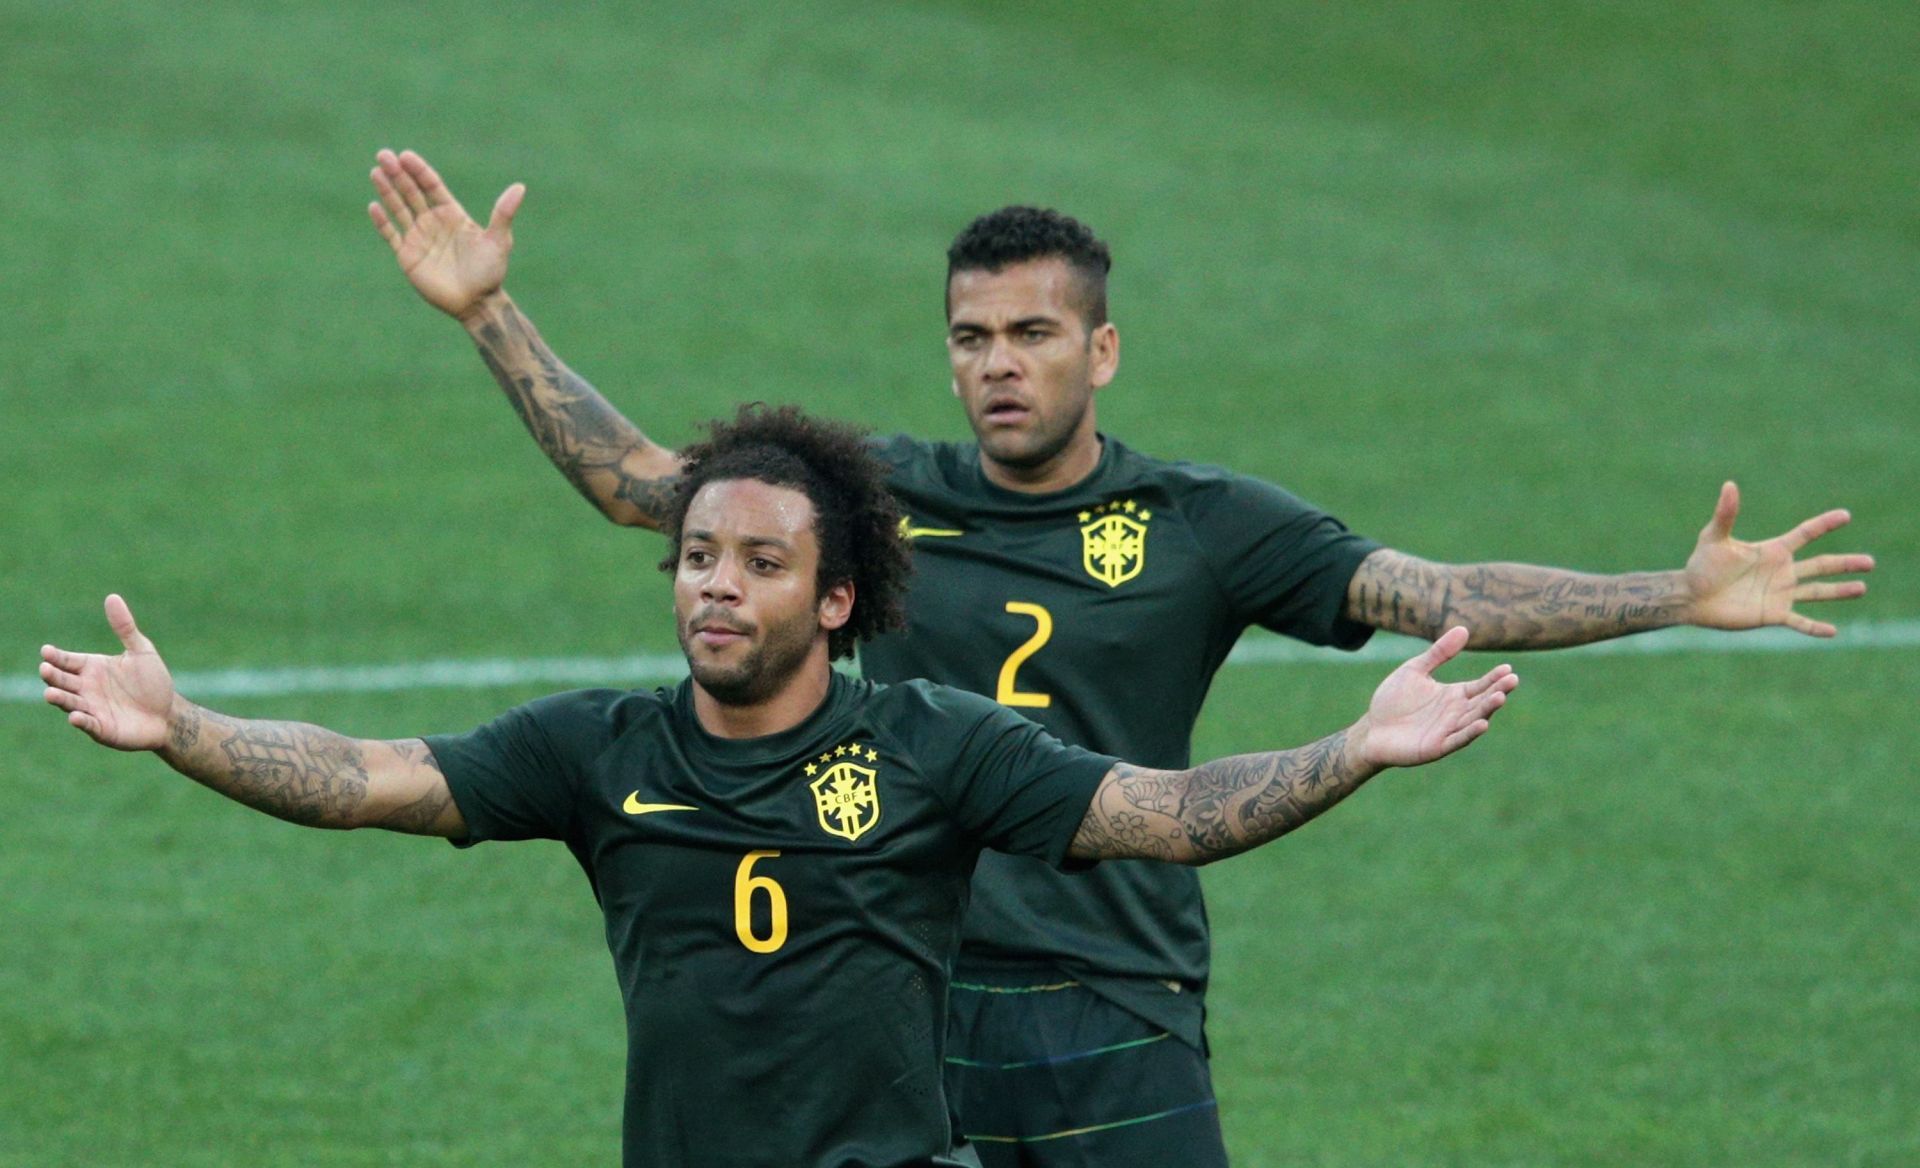 Marcelo and Dani Alves have enjoyed decorated careers